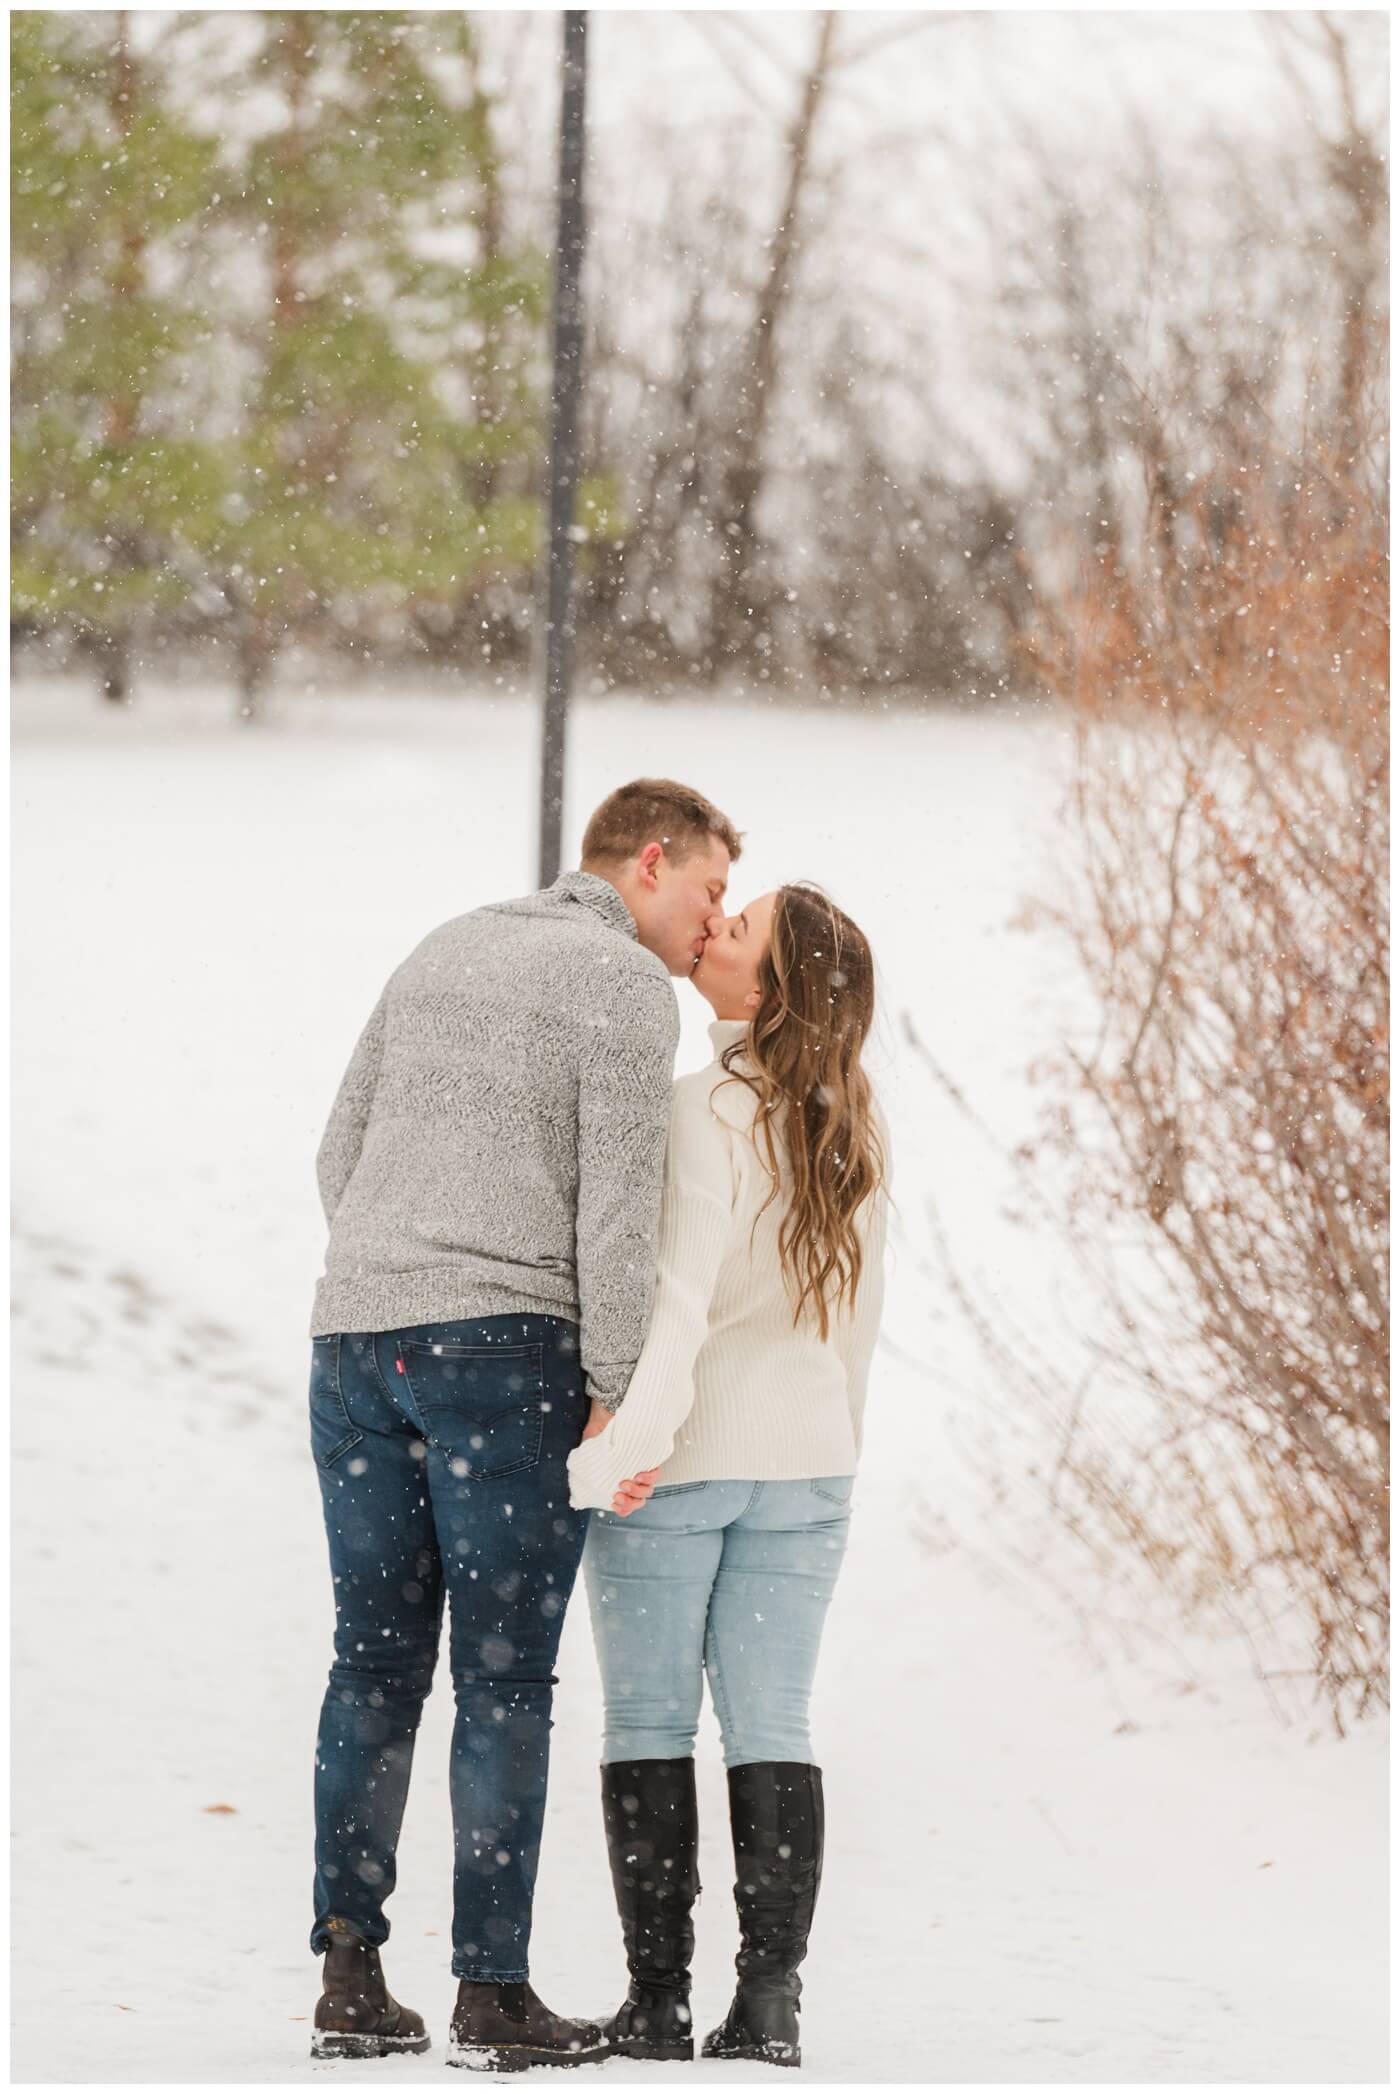 Michael & Briana - Engagement Session - 11 - UofR - Couple kissing in the snow